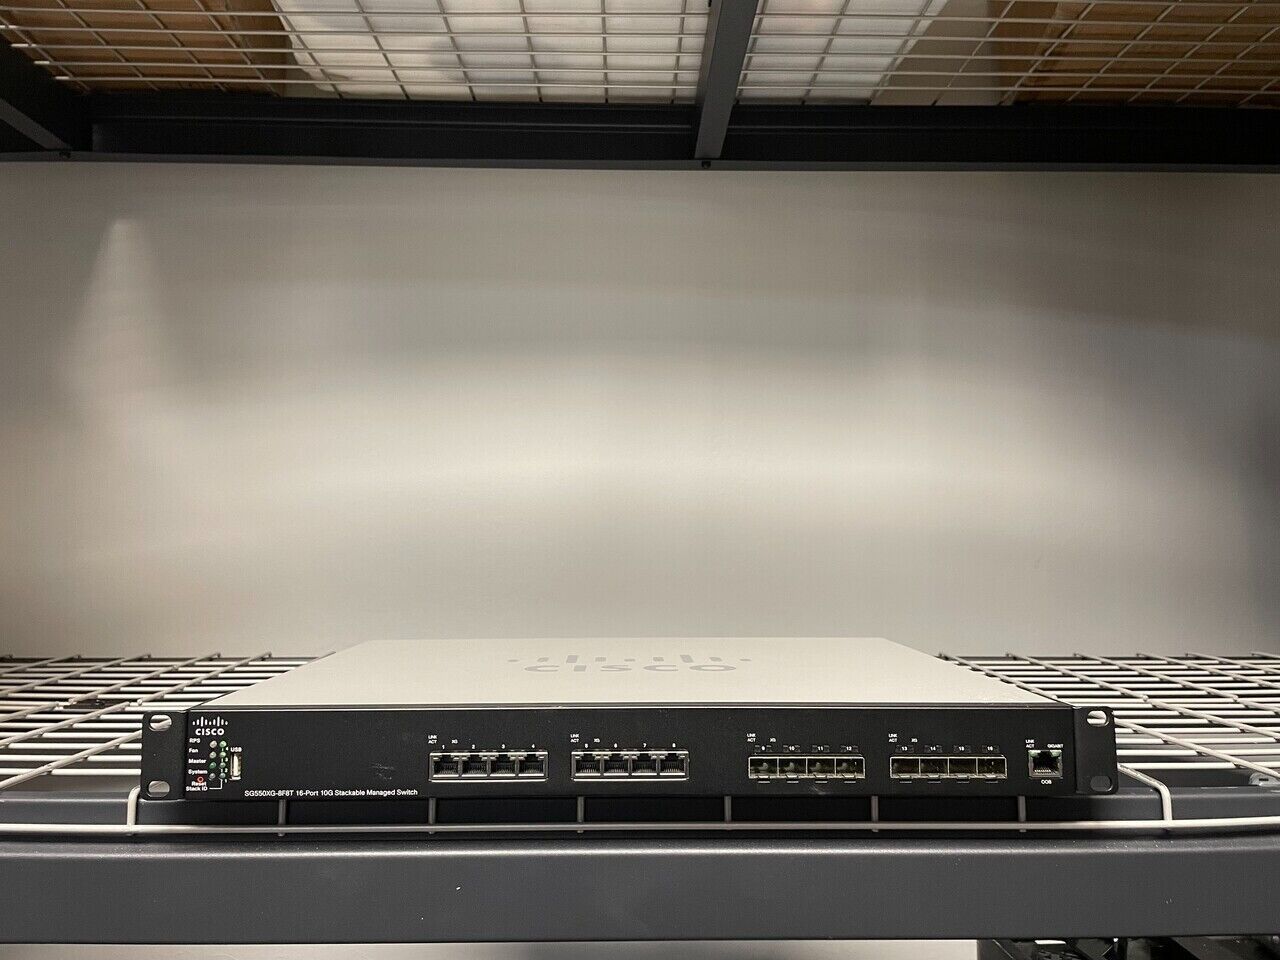 Cisco SG550XG-8f8T-K9 16-Port 10G Stackable Managed Network Switch